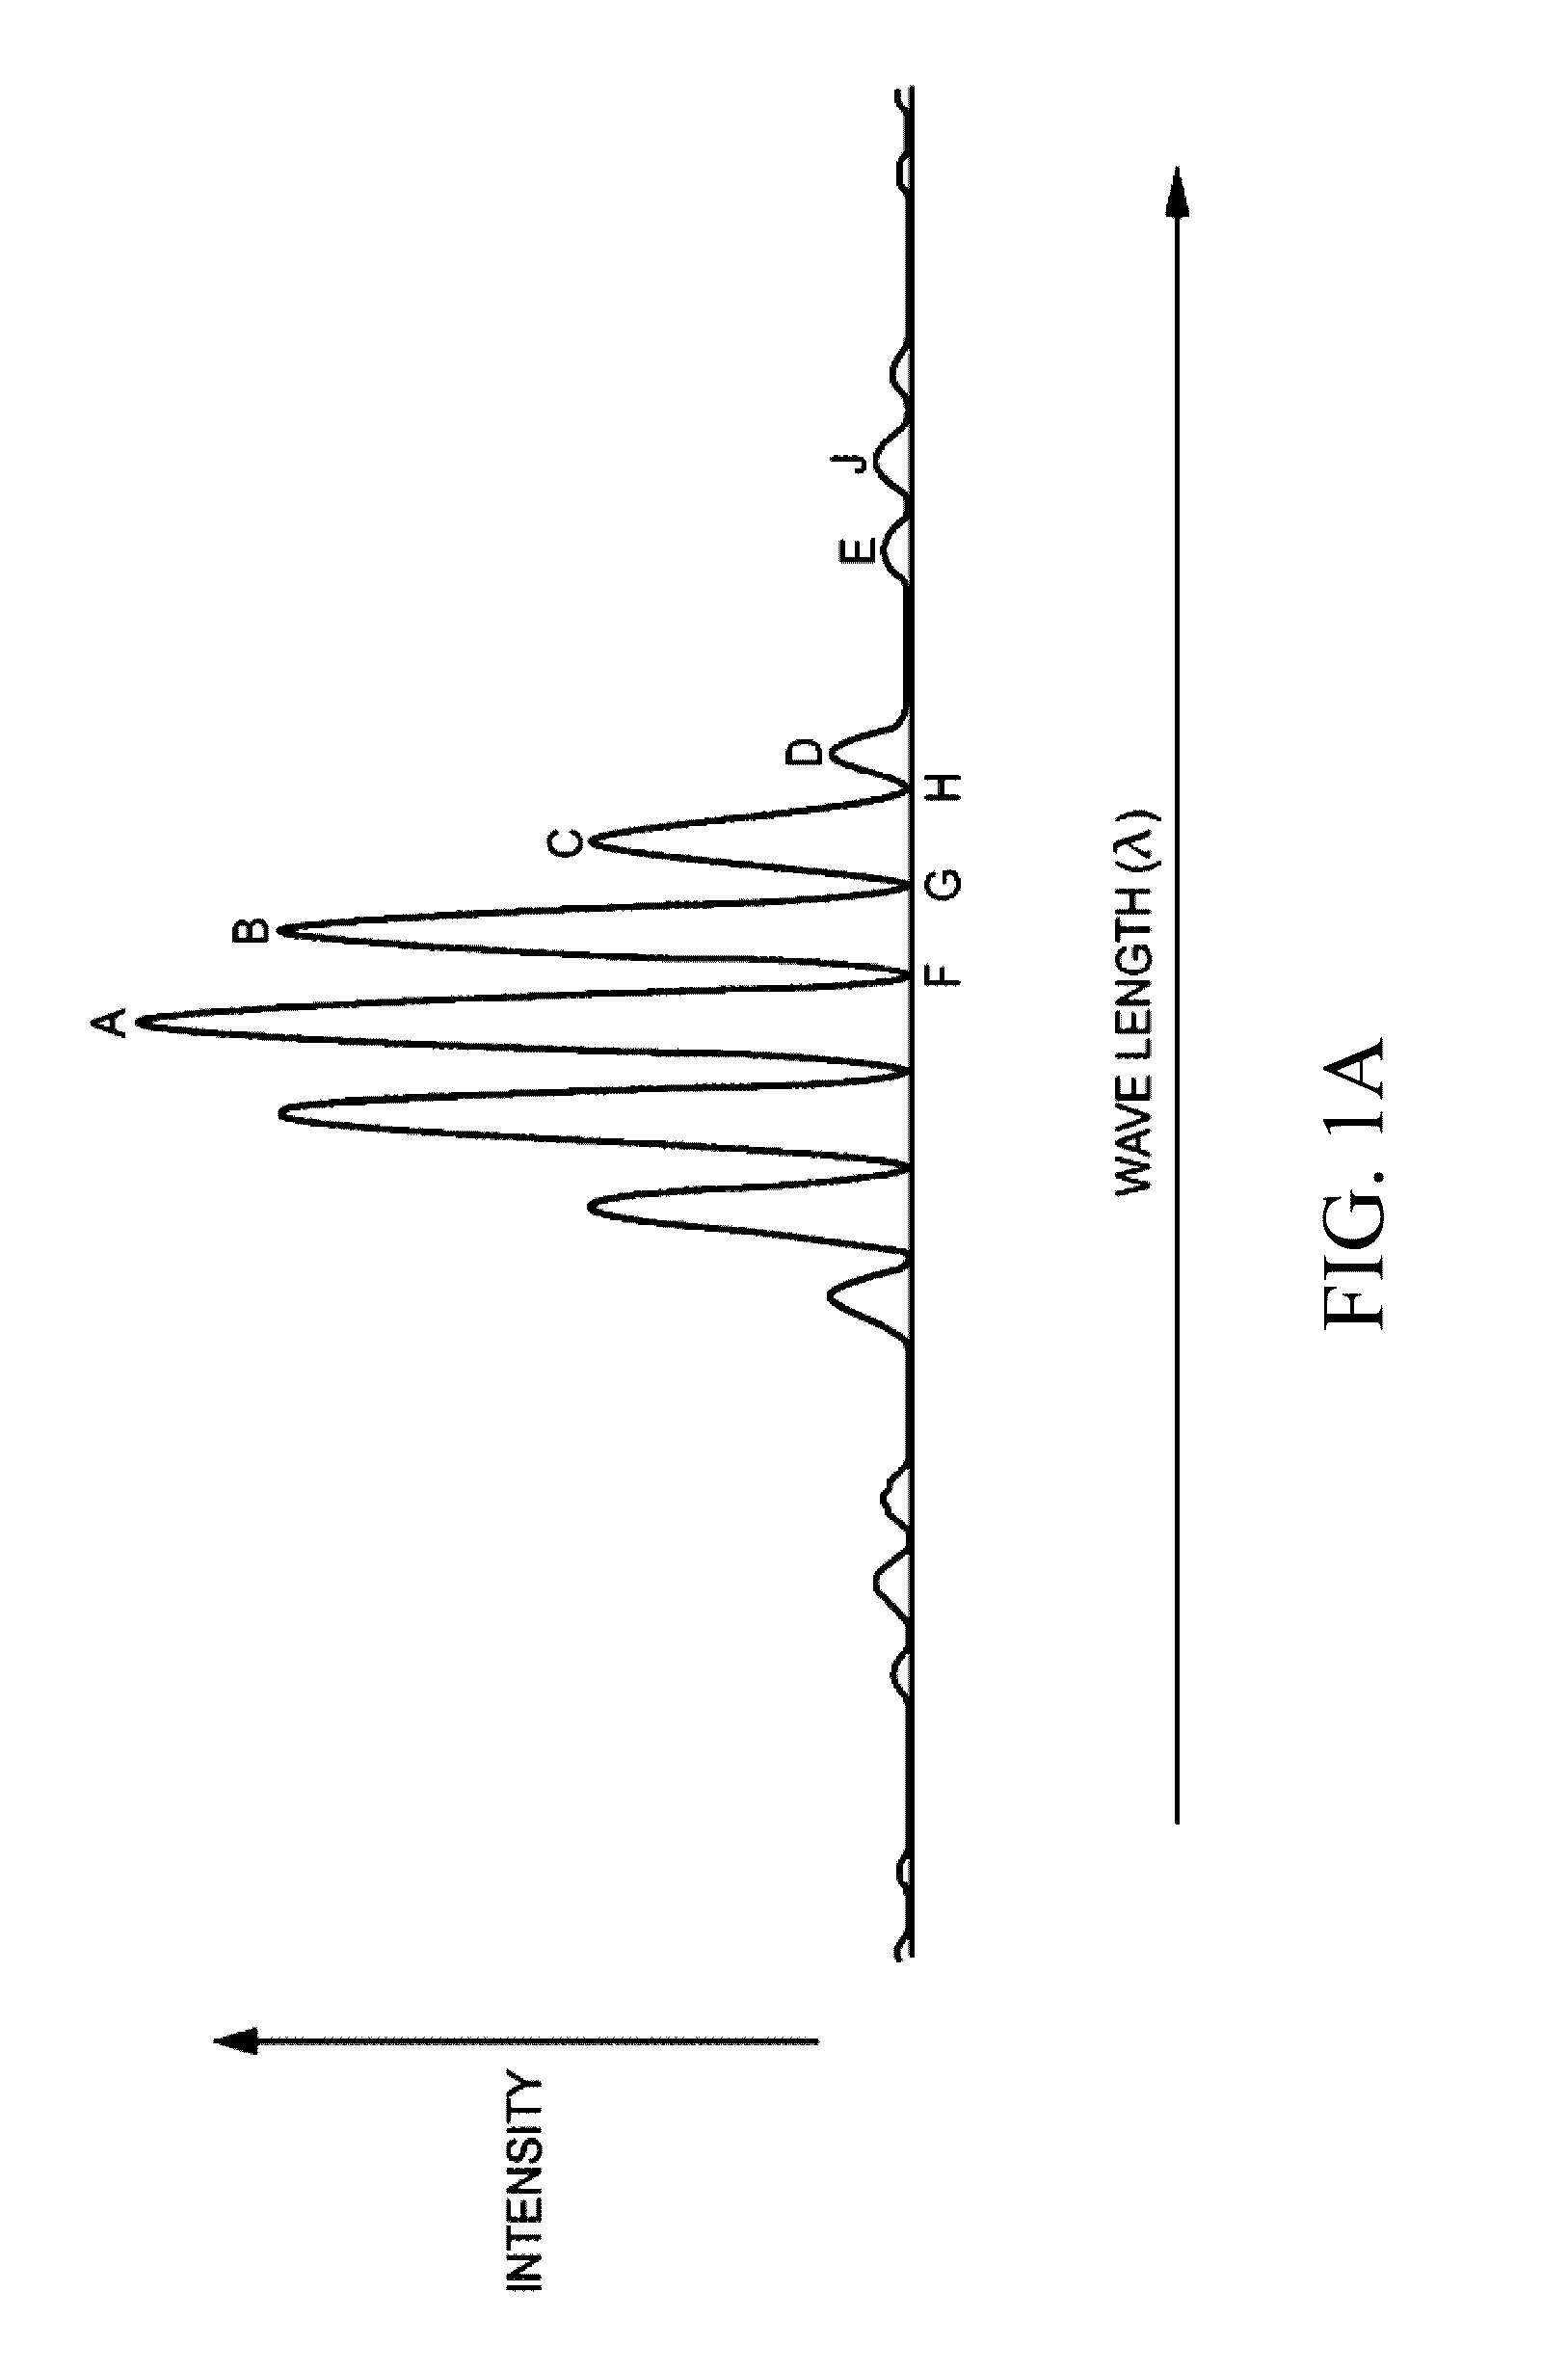 Submersible n-wavelength interrogation system and method for multiple wavelength interferometers